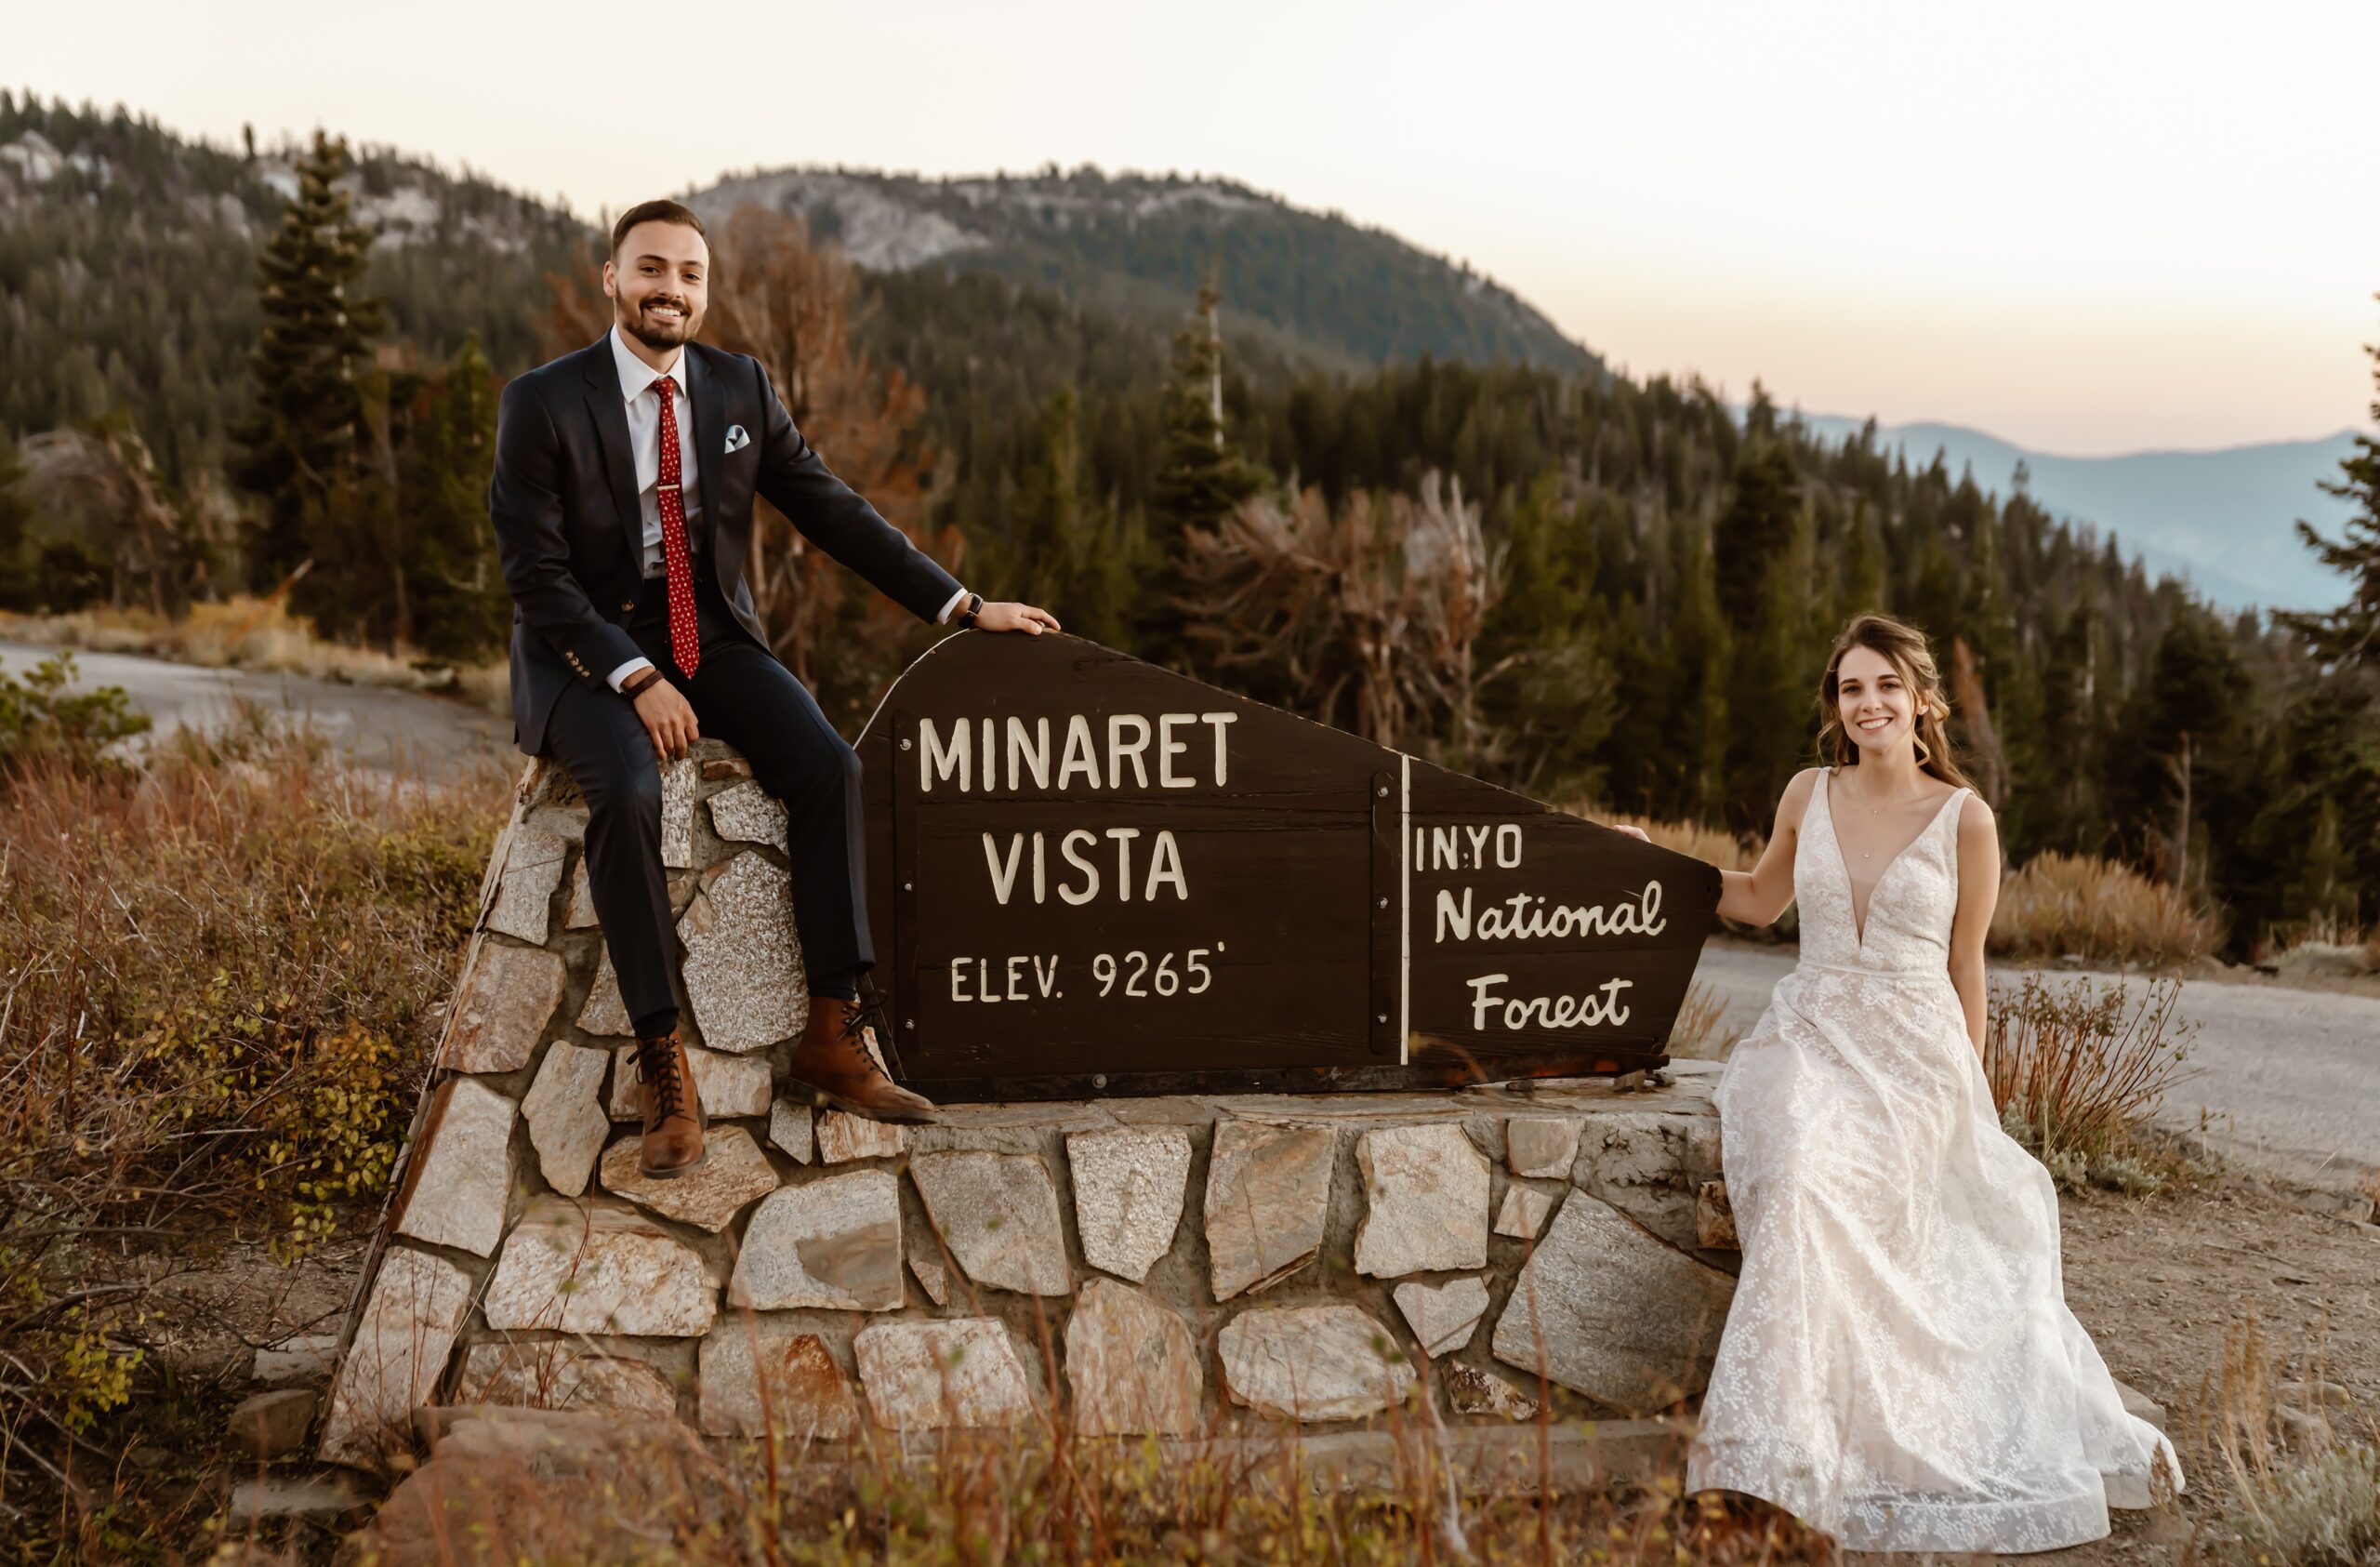 Bride and groom pose with the Minaret Vista sign